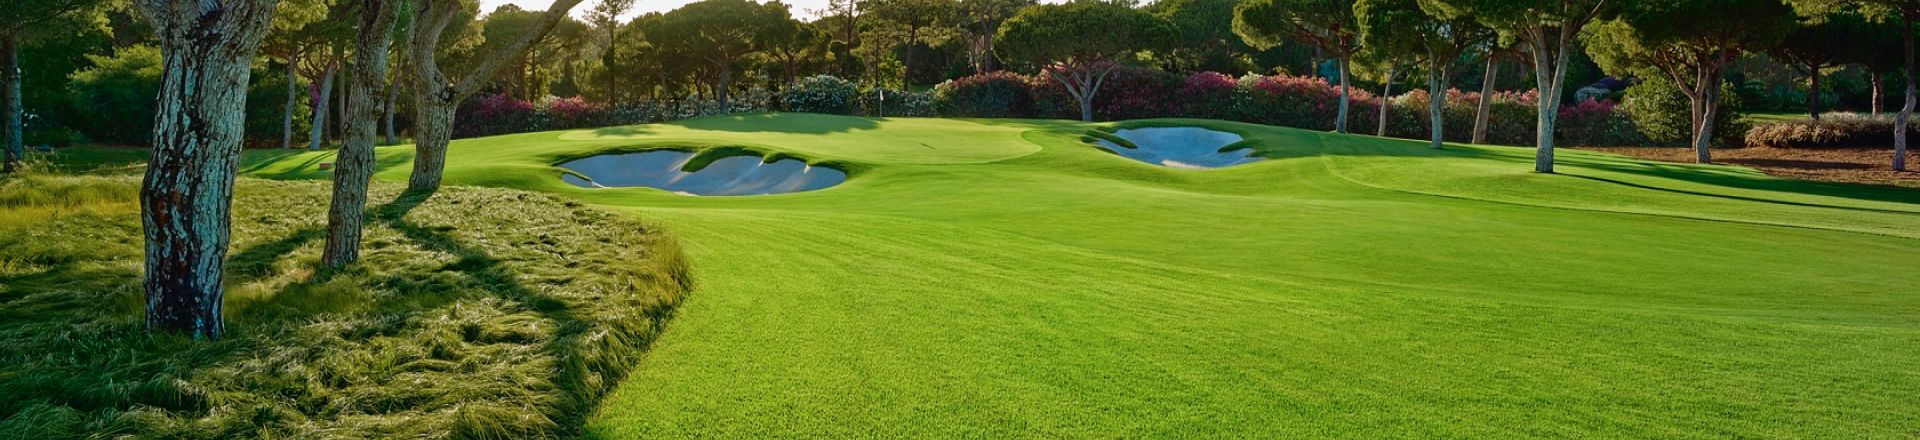 A golf course with green grass and a white bunker in a great golf holiday destination